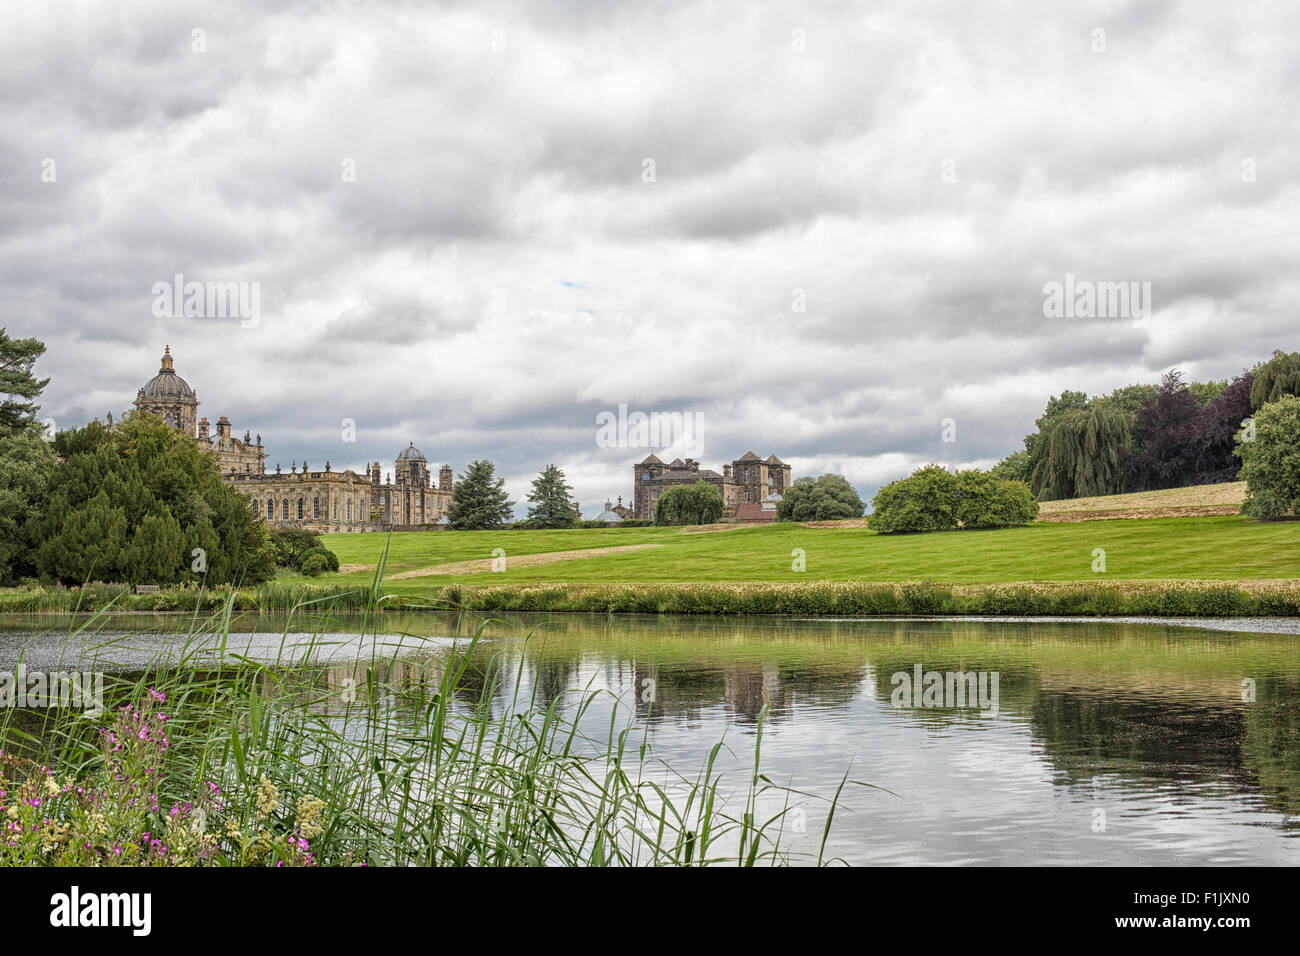 View on Castle Howard in Yorkshire. Castle Howard in Yorkshire, UK is a famous stately home built in the 17th and 18th century. Stock Photo